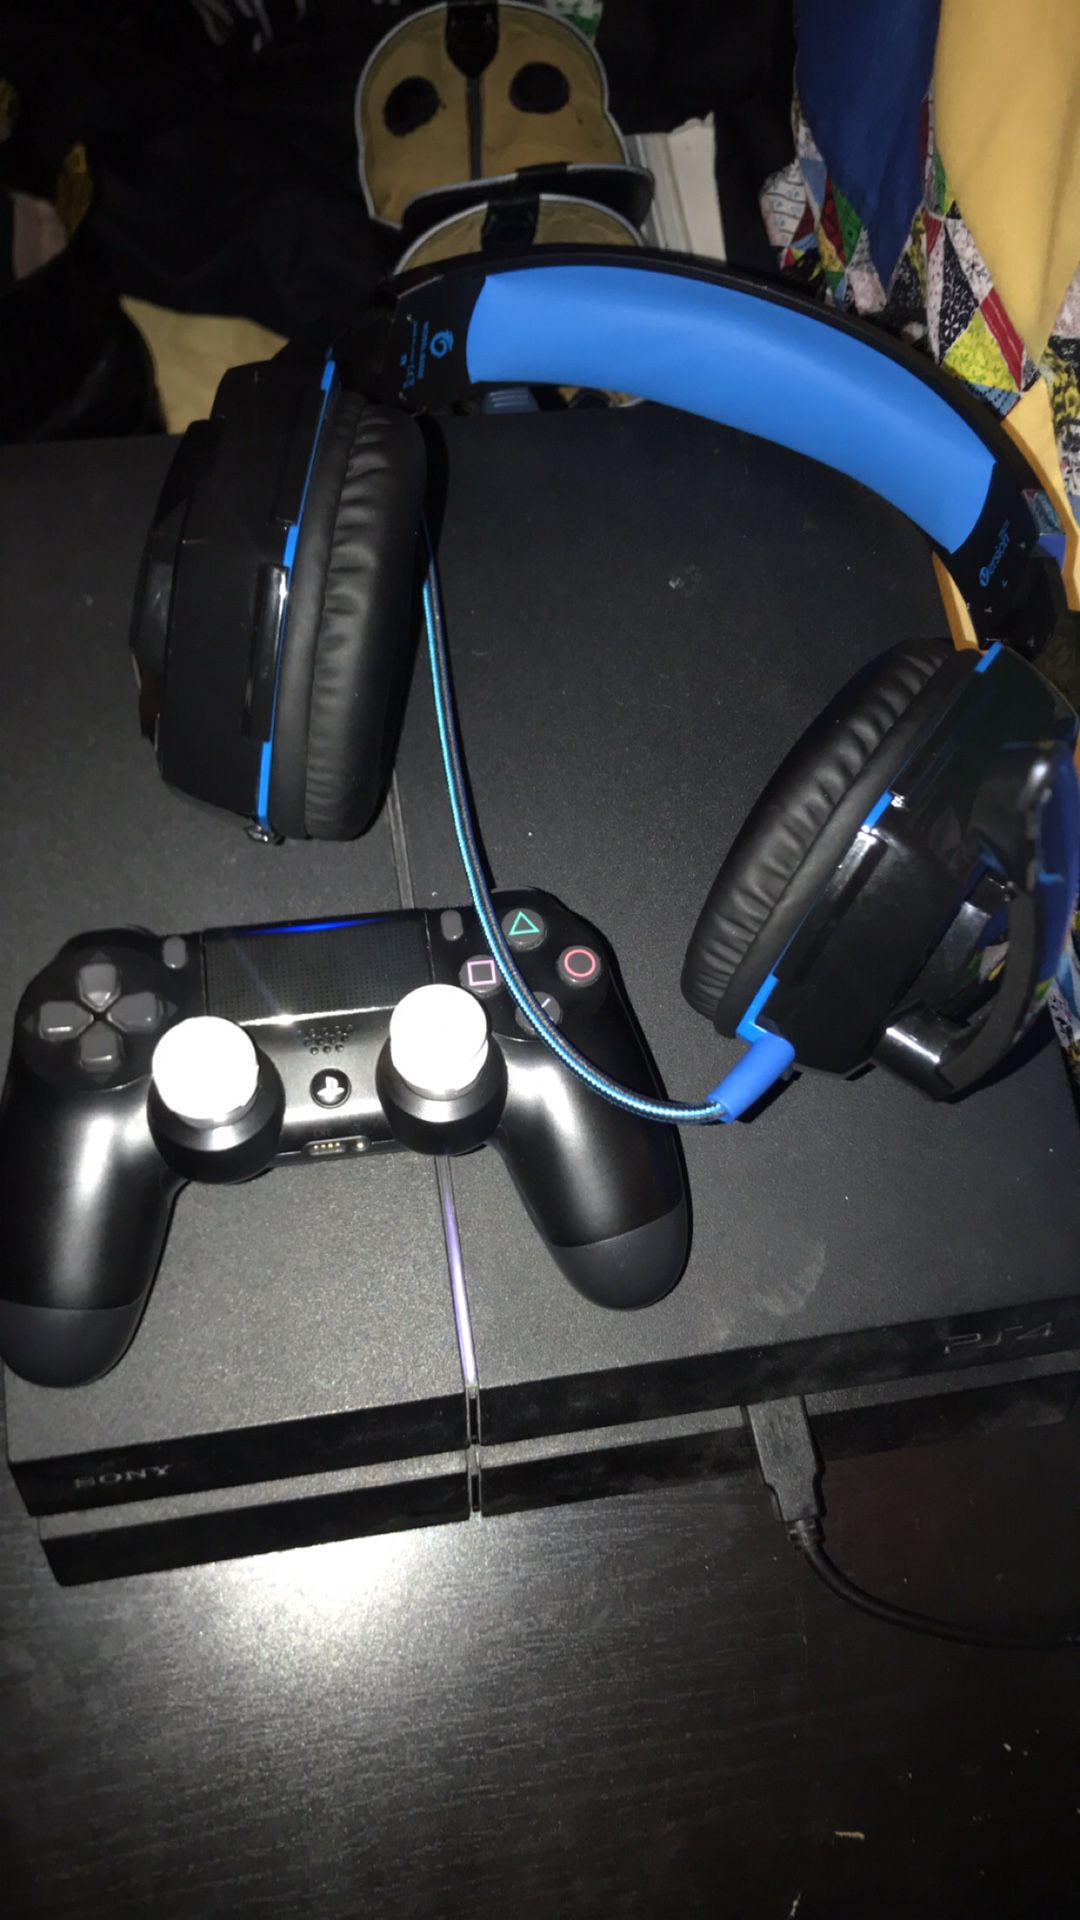 Ps4 with Controller and Headset